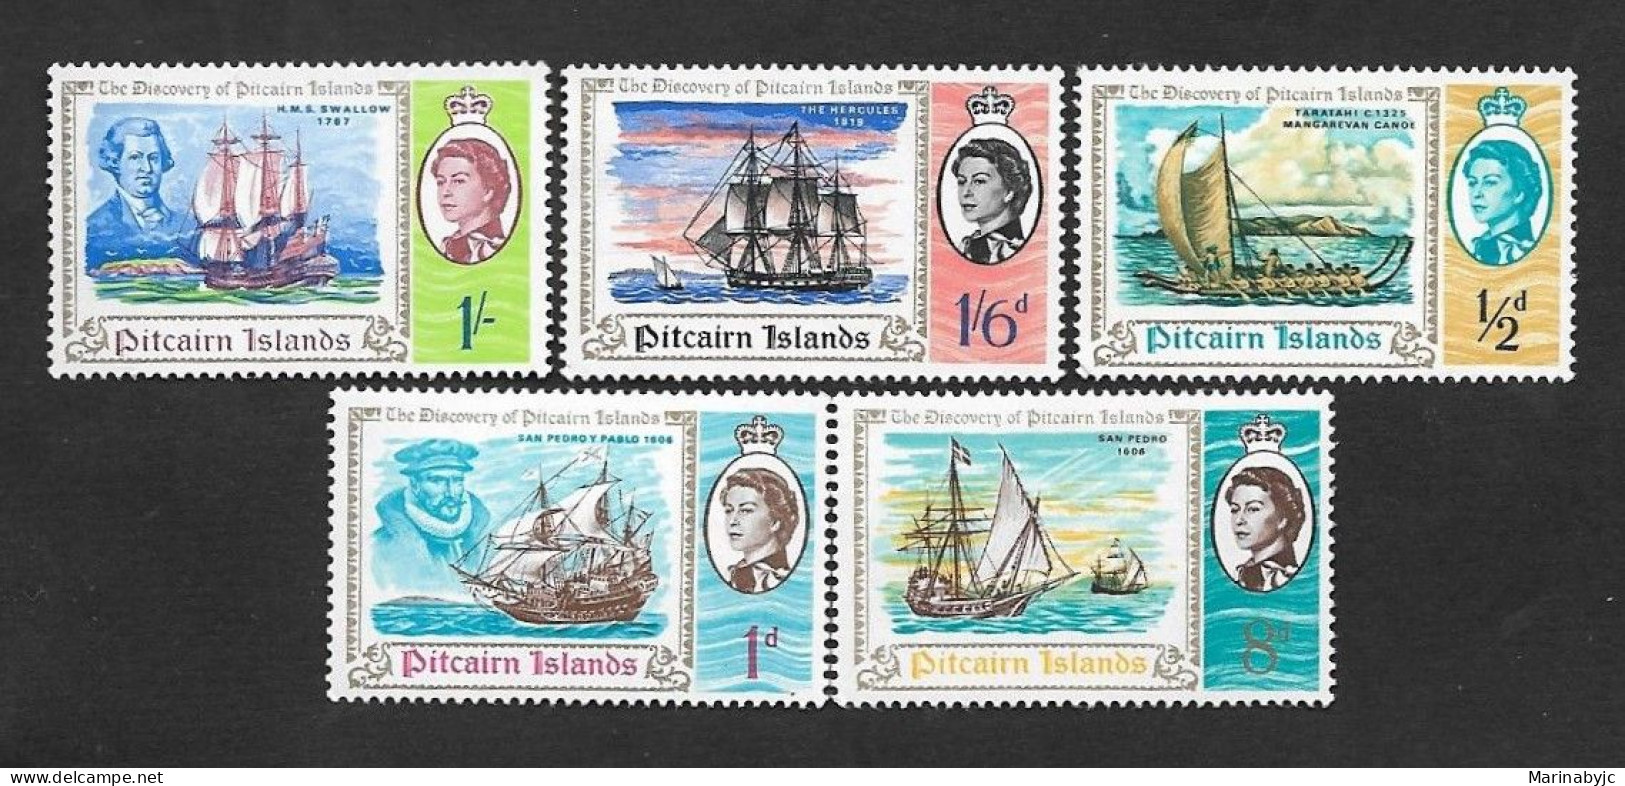 SE)1967 PITCAIRN ISLANDS, BICENTENARY OF THE DISCOVERY OF THE ISLAND BY CAPTAIN PHILIP CARTERET 5 MNH STAMPS - Autres - Océanie